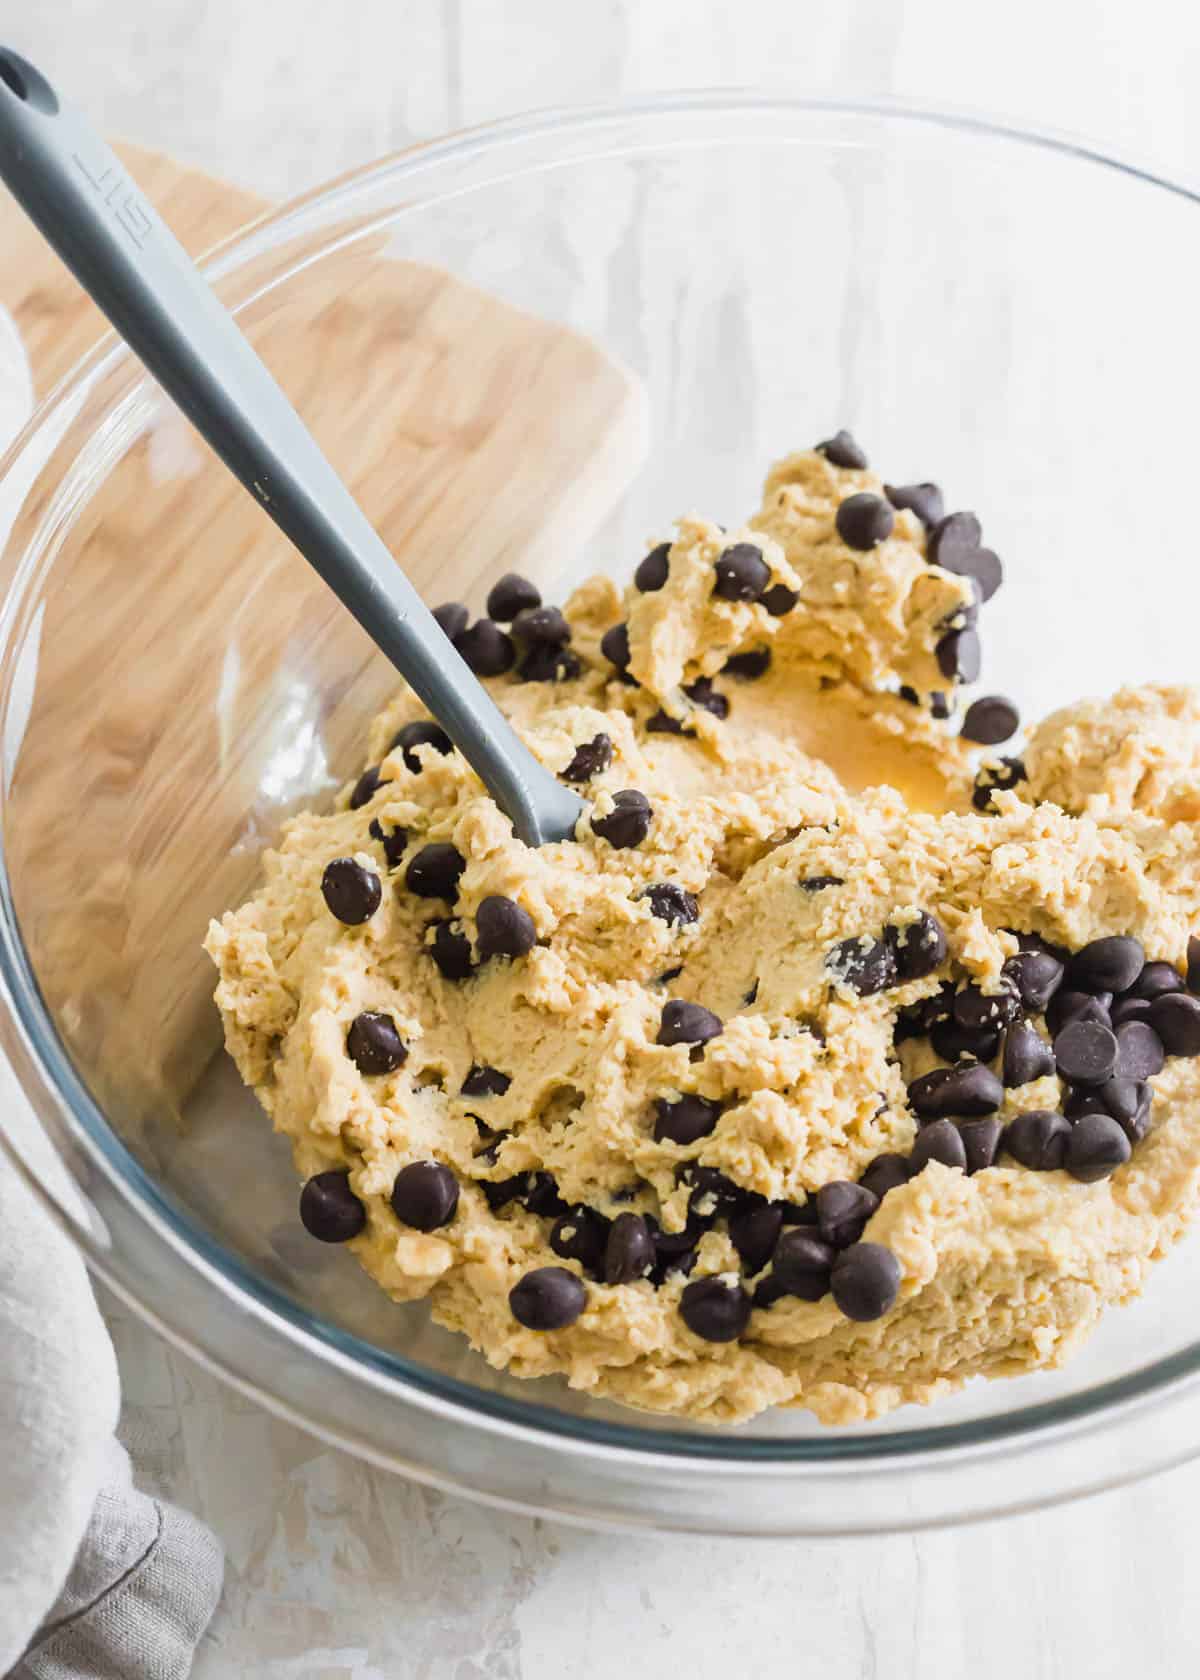 Chickpea blondie cookie dough batter in a glass bowl with chocolate chips mixed in.